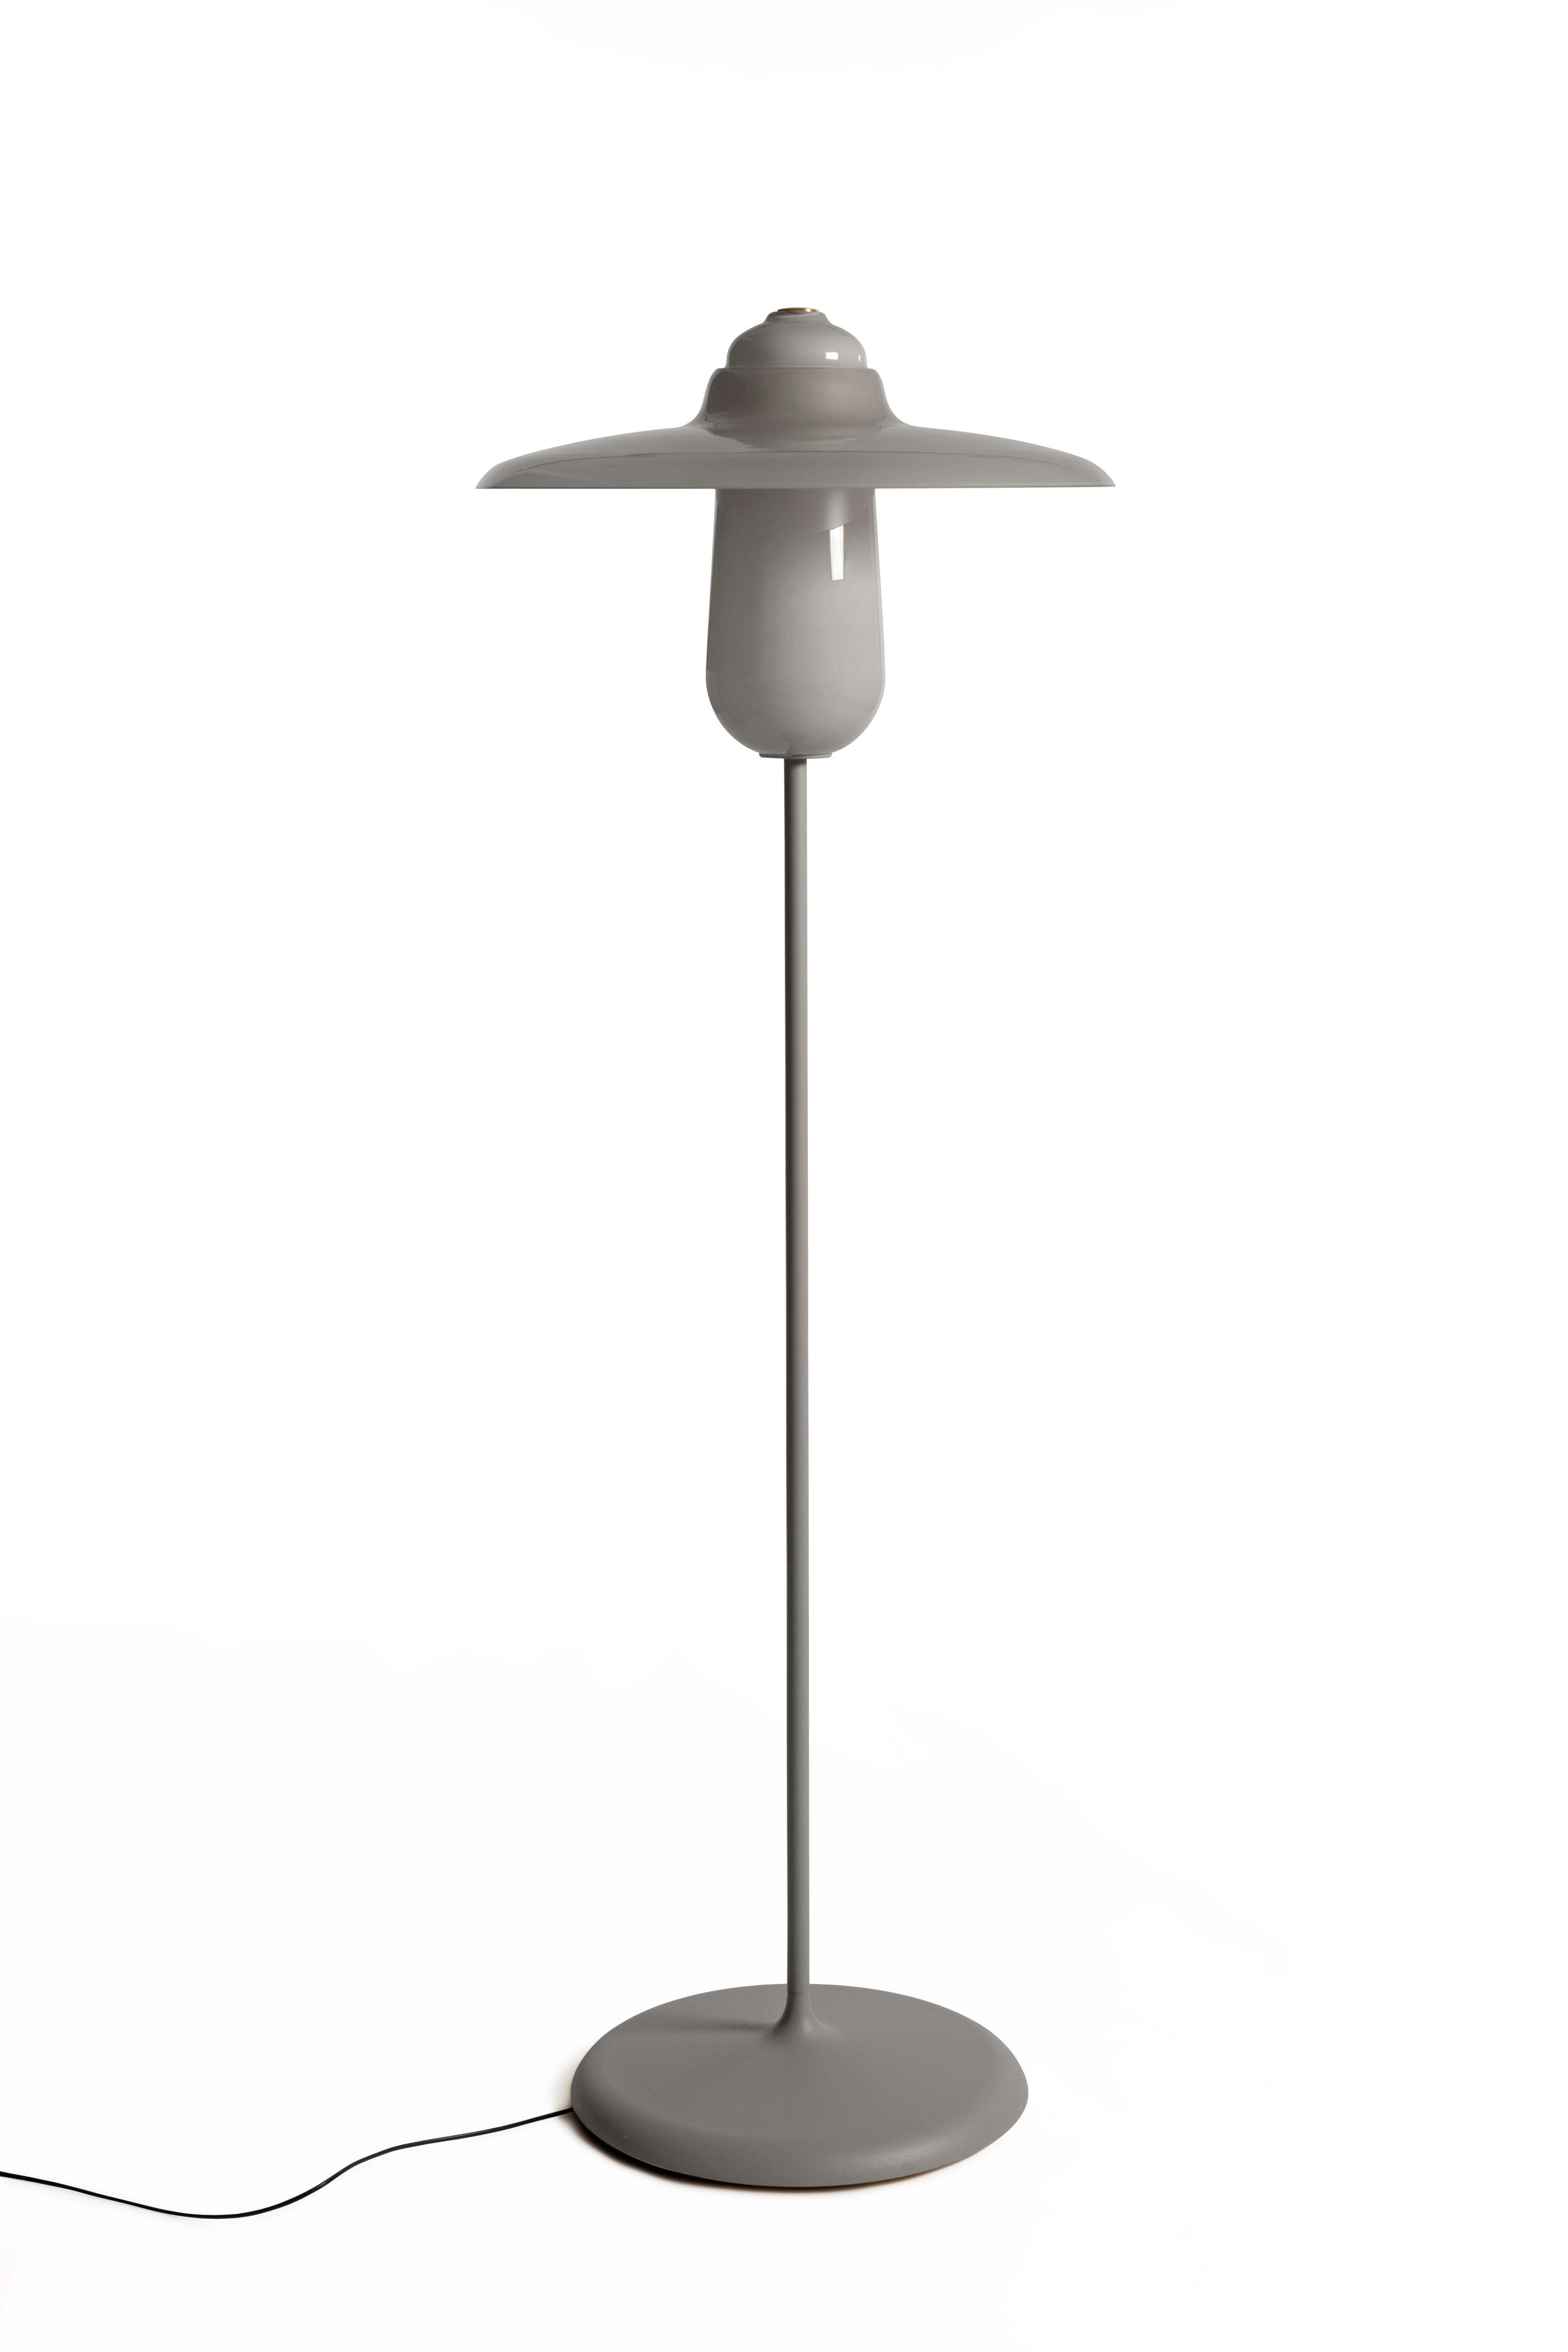 Revised Ovington Floor
The Ovington Floor Lamp is a stylish complement to any interior. Ovington Floor Lamp exudes an inviting radiance and warmth whether it`s illuminated or switched off. The Ovington Floor Lamp is crafted in Italian glass for the